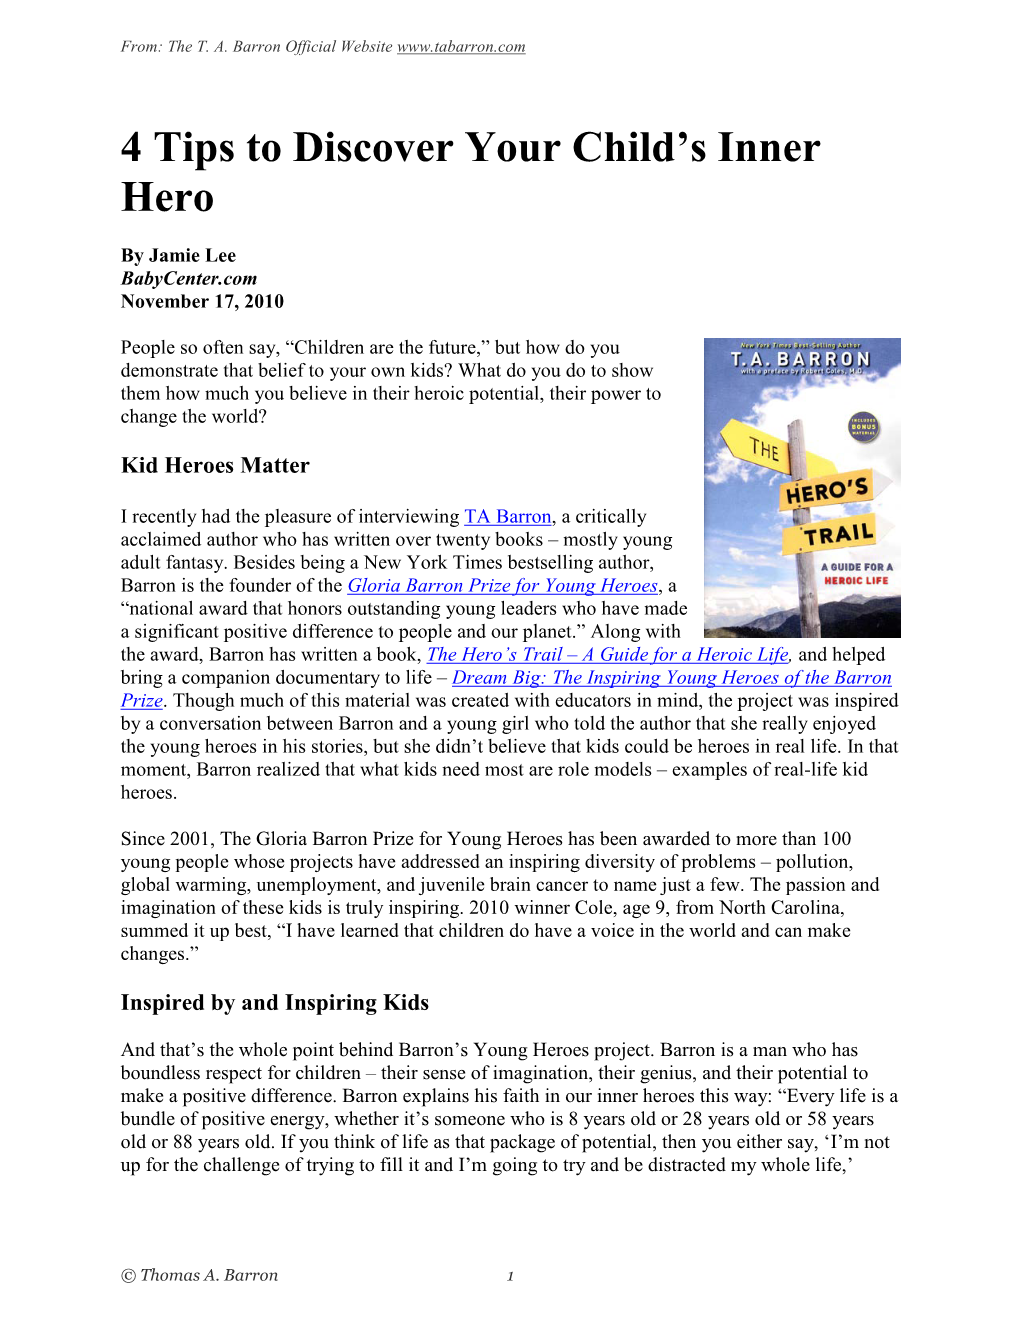 4 Tips to Discover Your Child's Inner Hero